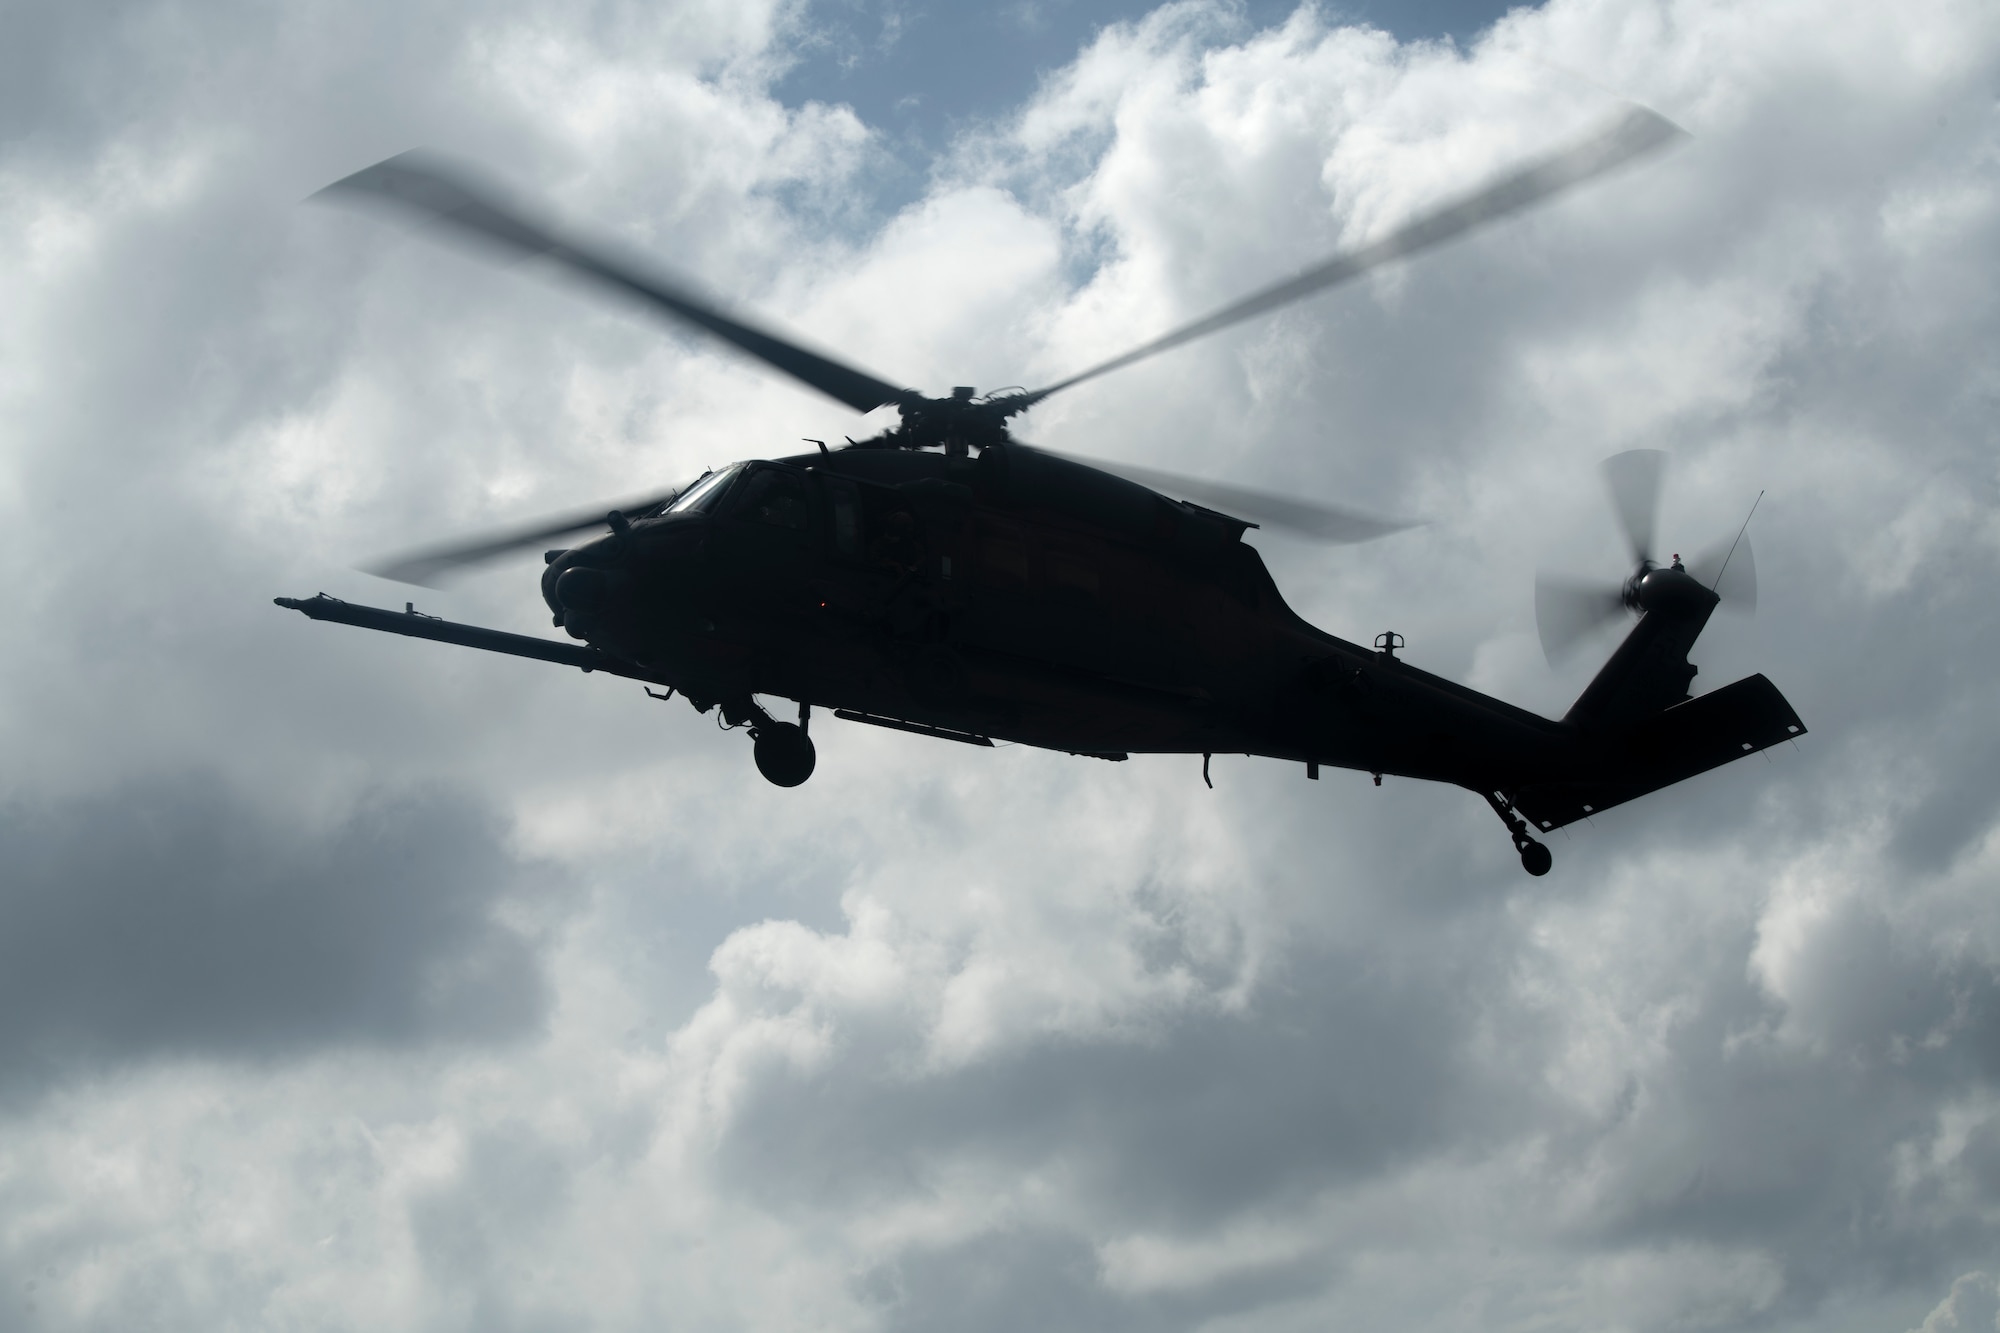 An HH-60G Pave Hawk assigned to the 33rd Rescue Squadron hovers overhead during an amphibious search and rescue training in the Pacific Ocean, Sept. 13, 2022. For humanitarian operations, the Pave Hawk can perform a multitude of roles including civil search and rescue, medical evacuation and disaster response. (U.S. Air Force photo by Senior Airman Jessi Roth)